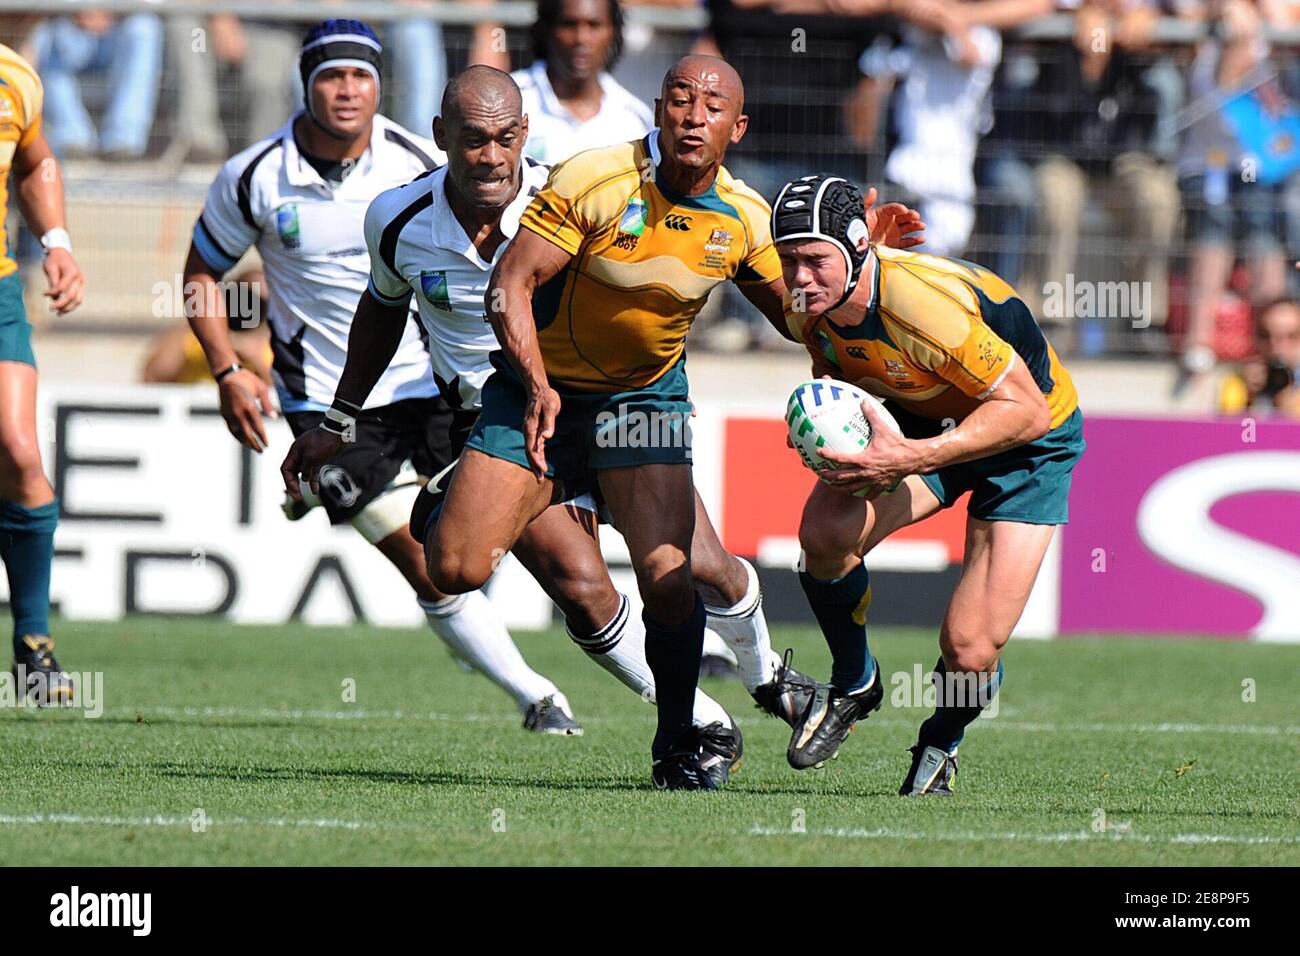 (L-R) Australia's scrum-half and captain George Gregan and Australia's fly-half Berrick Barnes during IRB Rugby World Cup 2007, Pool A, Australia vs Fidji at the Stade de la Mosson in Montpellier, France on September 23, 2007. Australia won 55-12. Photo by Nicolas Gouhier/Cameleon/ABACAPRESS.COM Stock Photo